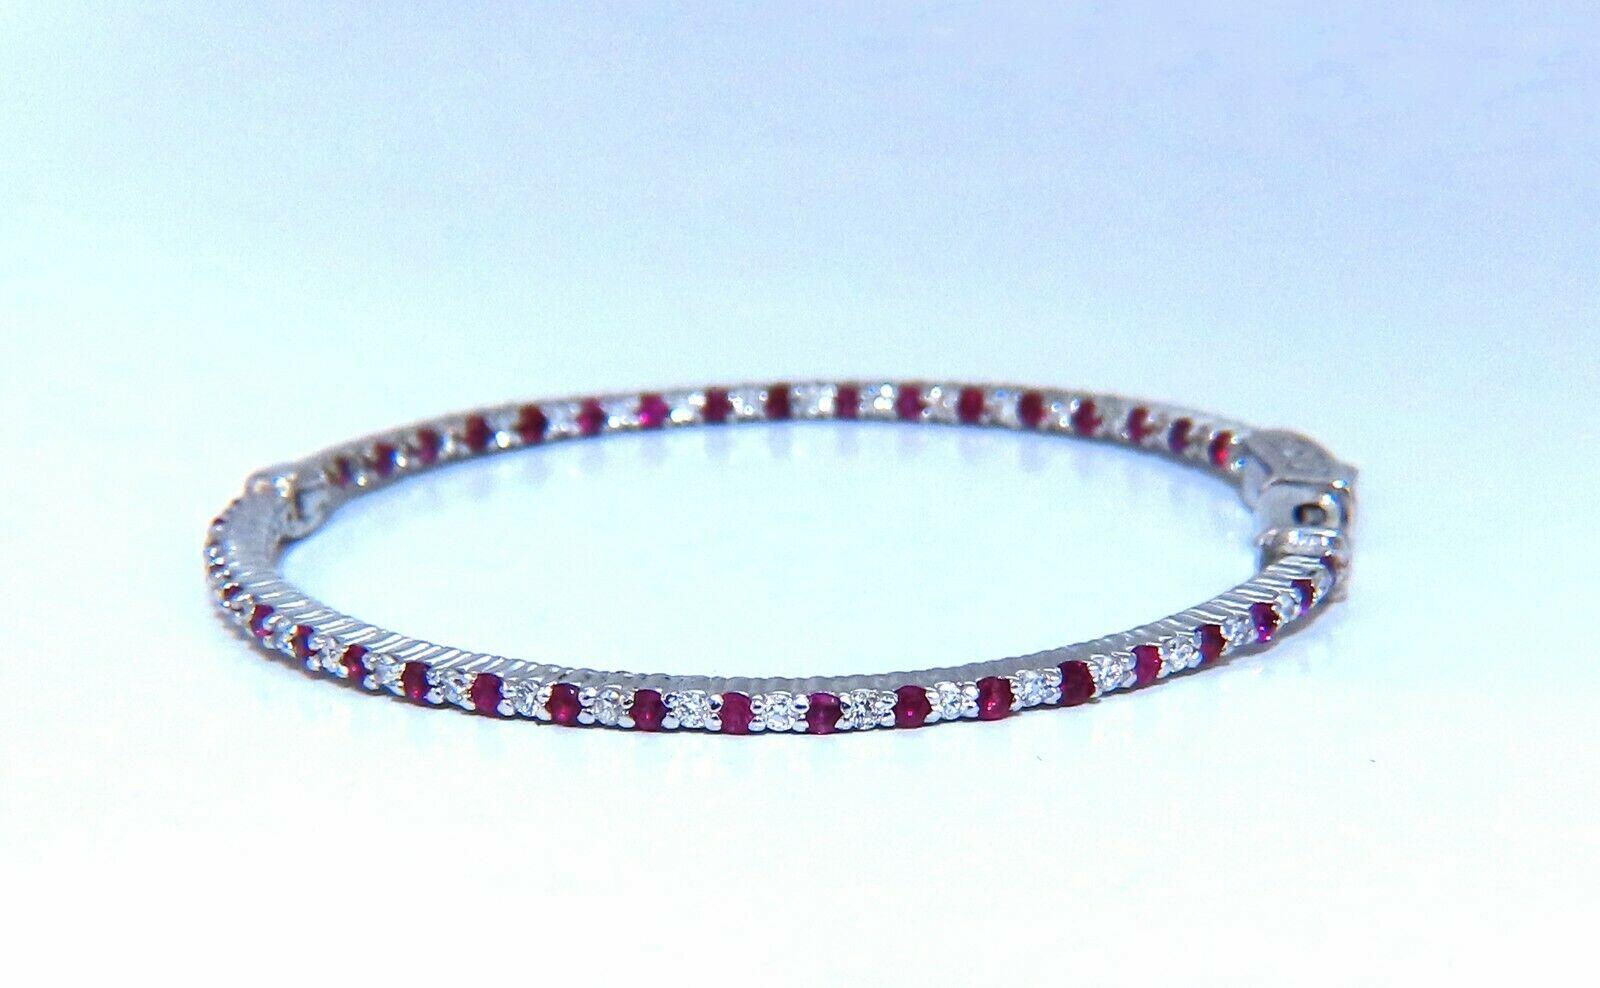 Inside/out  natural Ruby and Diamond hoop earrings.

1.64ct. round rubies, full brilliant cut clean clarity and transparent

.76ct. natural round diamonds G color vs2 clarity.

14 karat white gold 12.2 grams

50mm wide (front to back)

1.6 mm wide